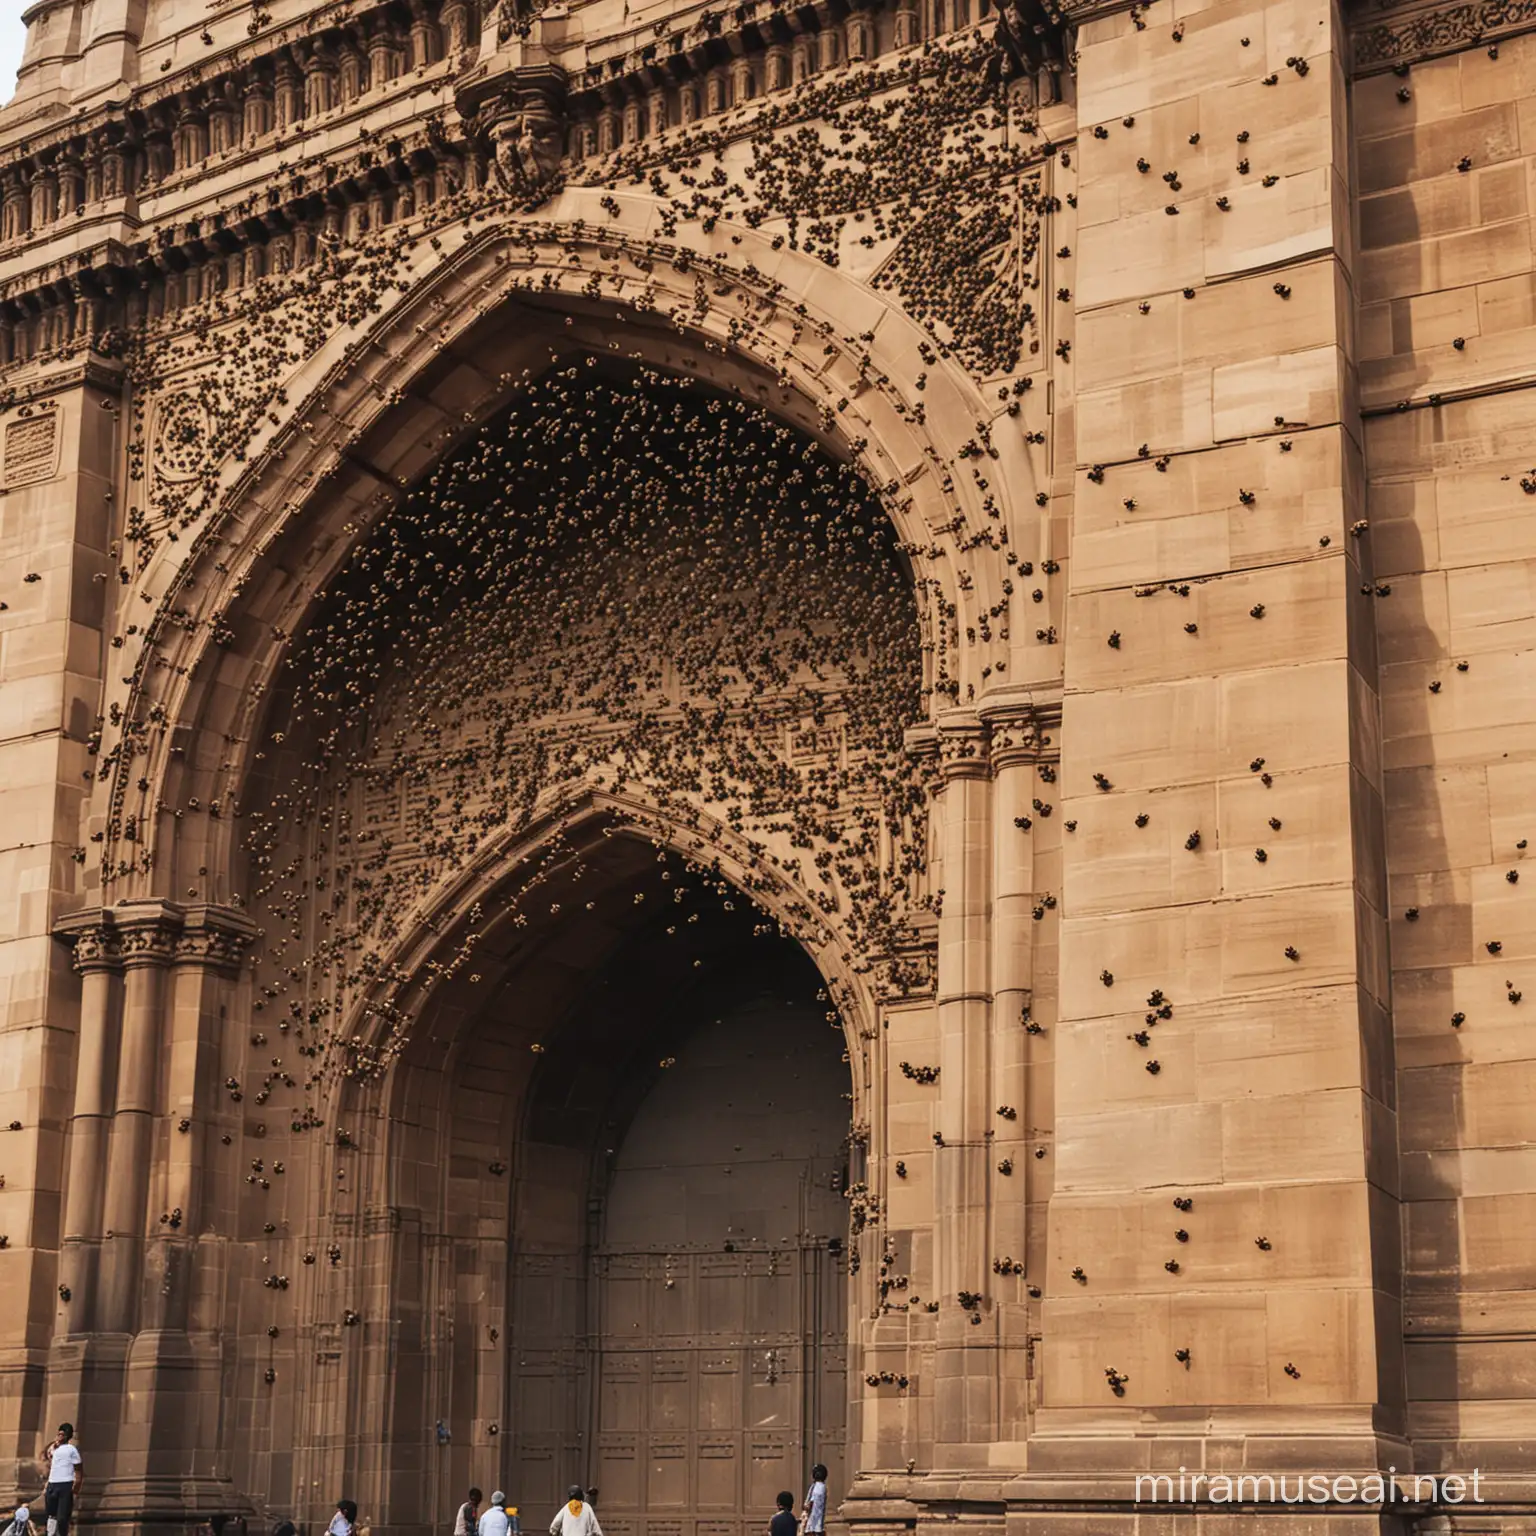 bees surrounding the gateway of india
